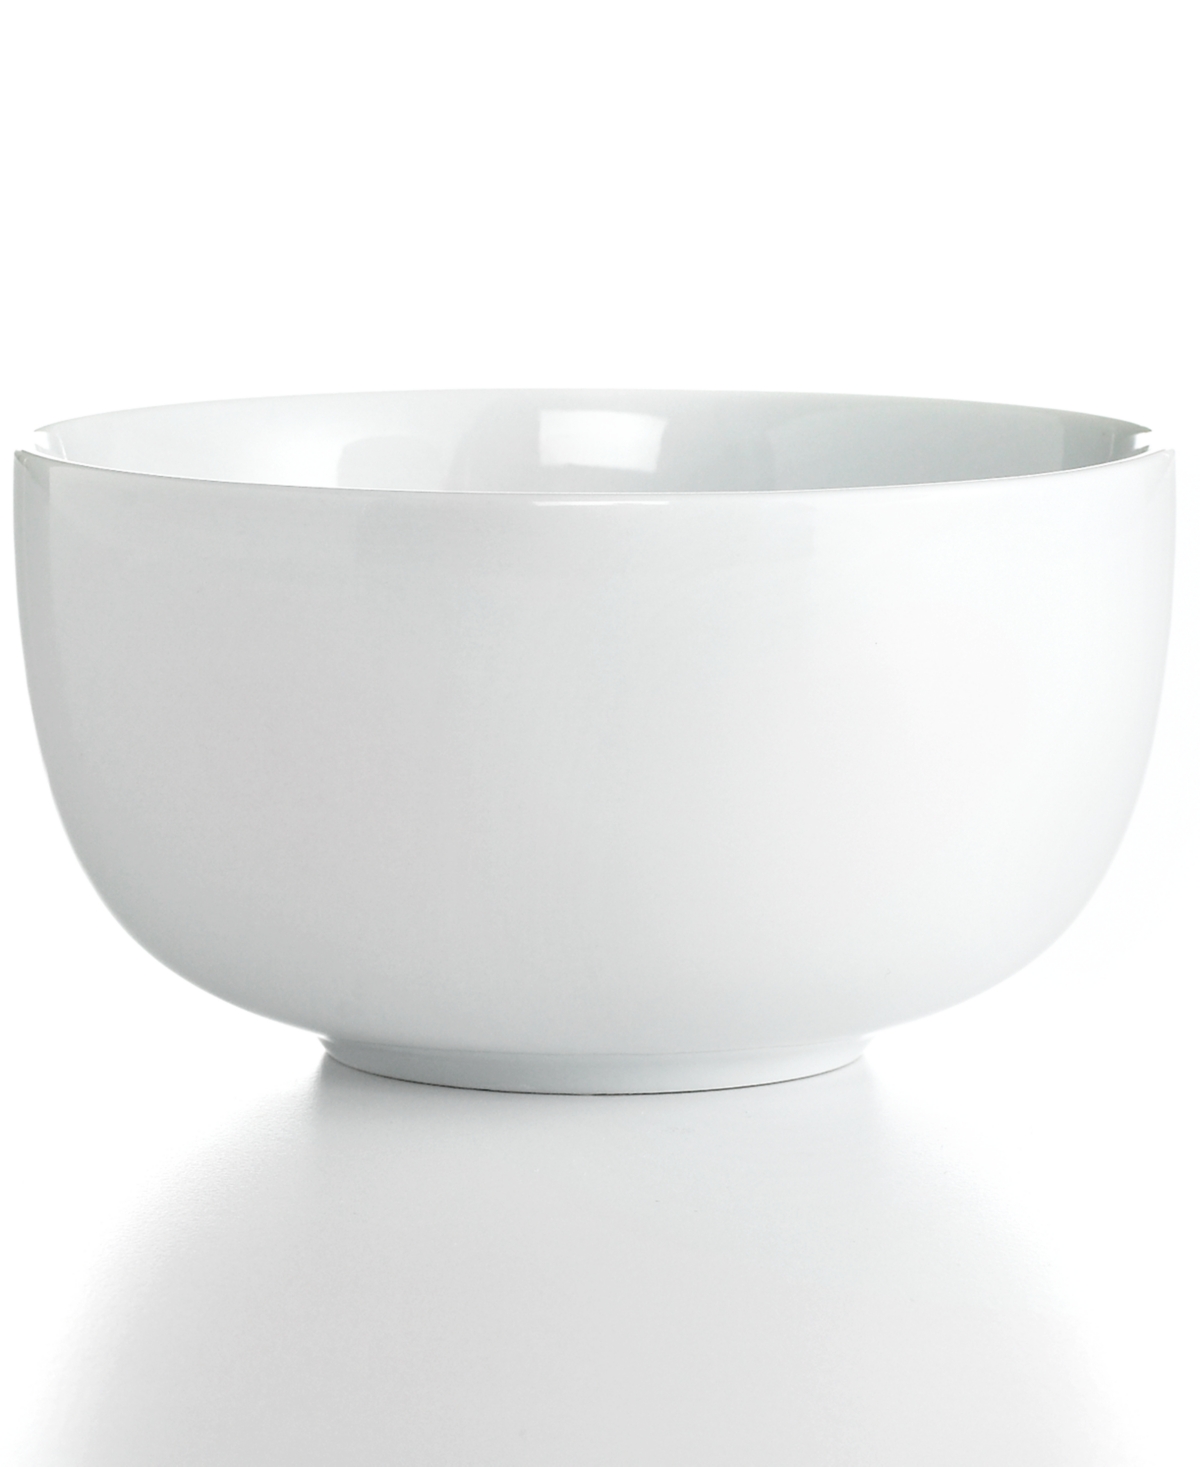 Whiteware 20 oz. Cereal Bowl, Created for Macy's